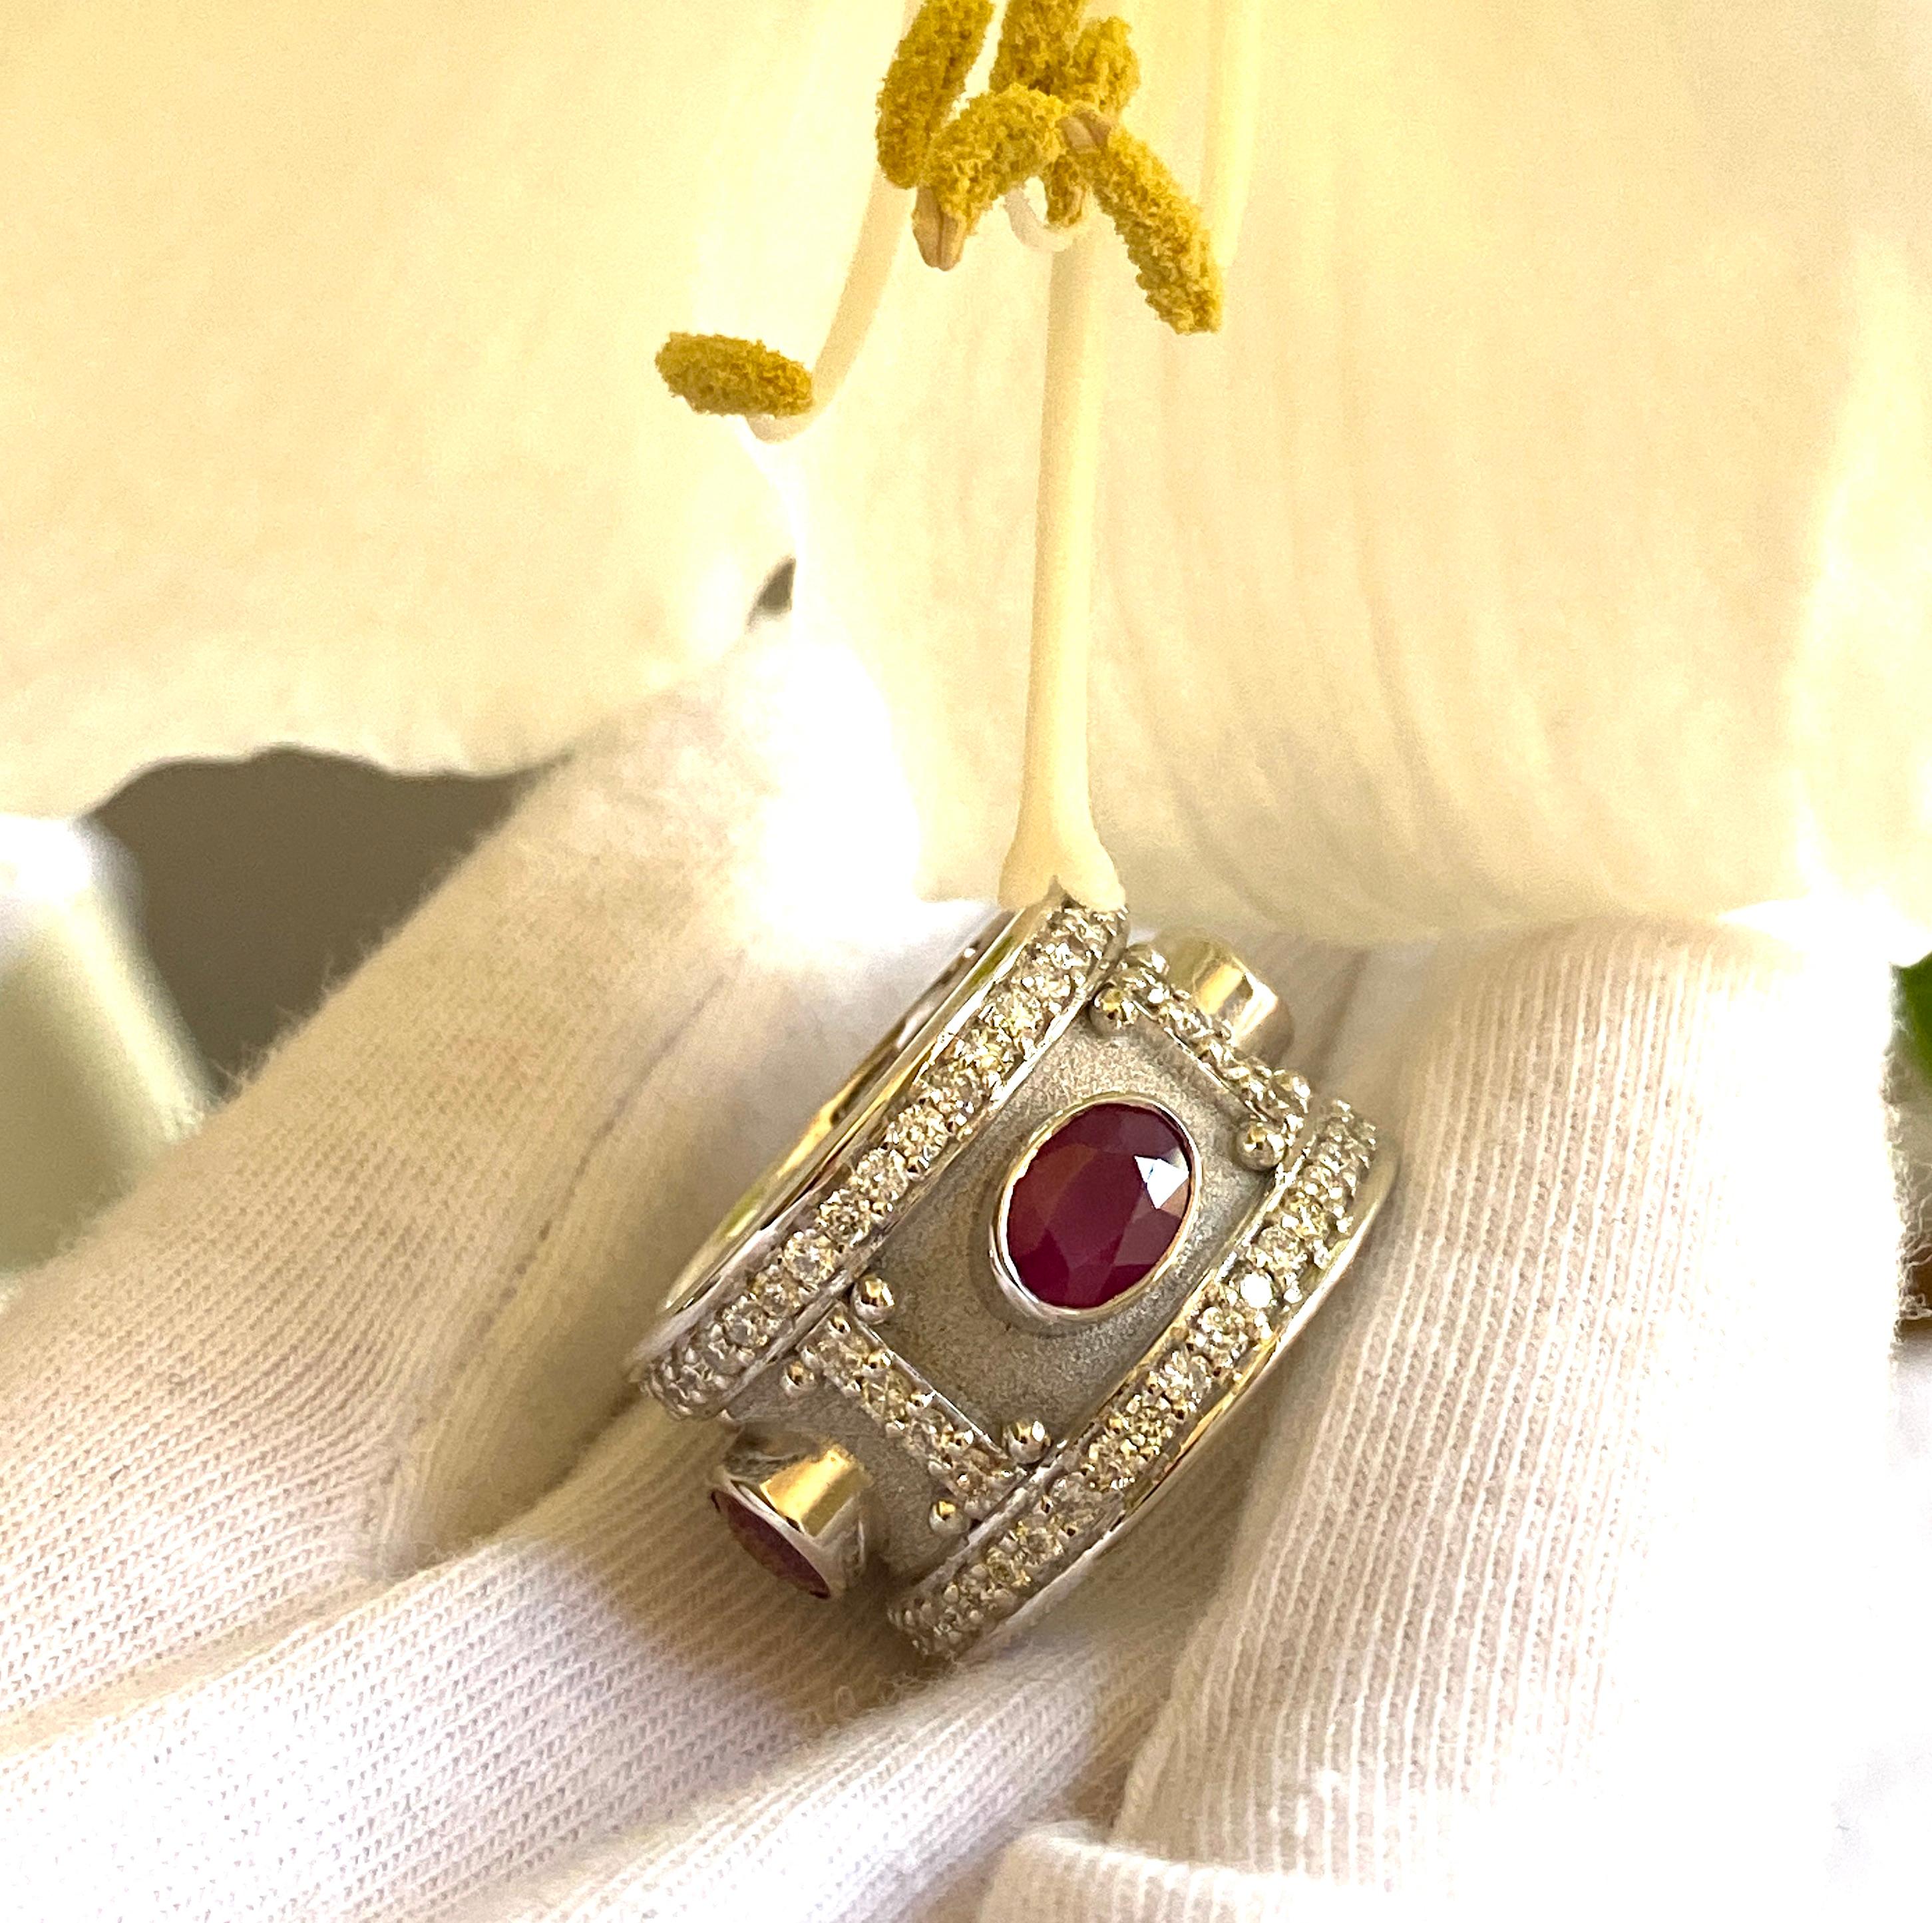 The is gorgeous S.Georgios designer 18 Karat Solid White Gold Wide Band Ring all handmade in Greece in the elegant look inspired by Byzantine era. Ring is heavily decorated with granulation details and features 4 oval cut Rubies in total weight of